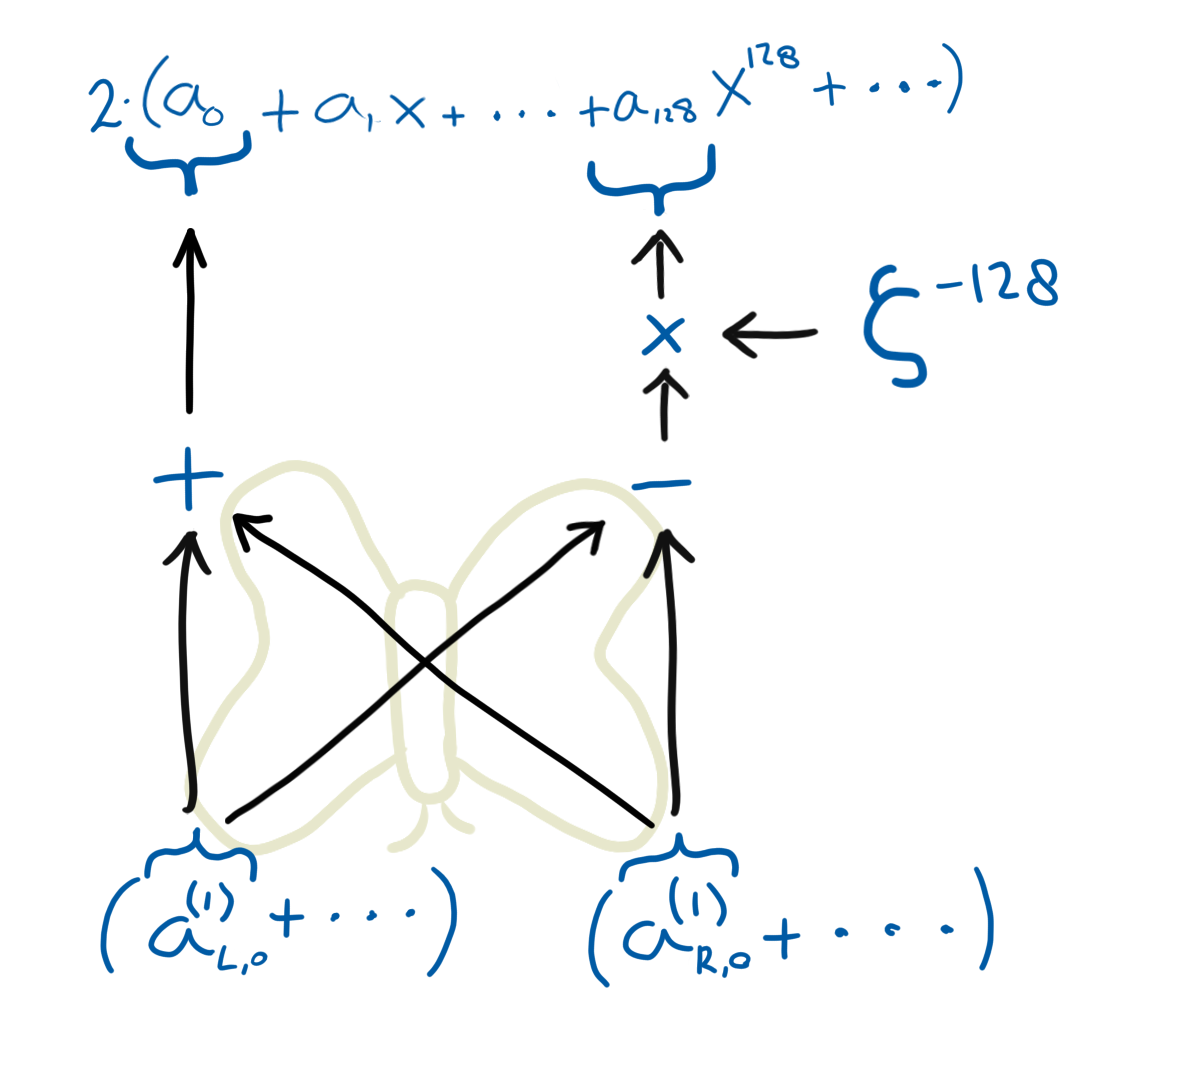 Butterfly diagram similar to the other diagram that was shown. This diagram shows the multiplication with the twiddle factor in the end, instead of in the beginning of the operation. The overlayed butterfly is upside down.